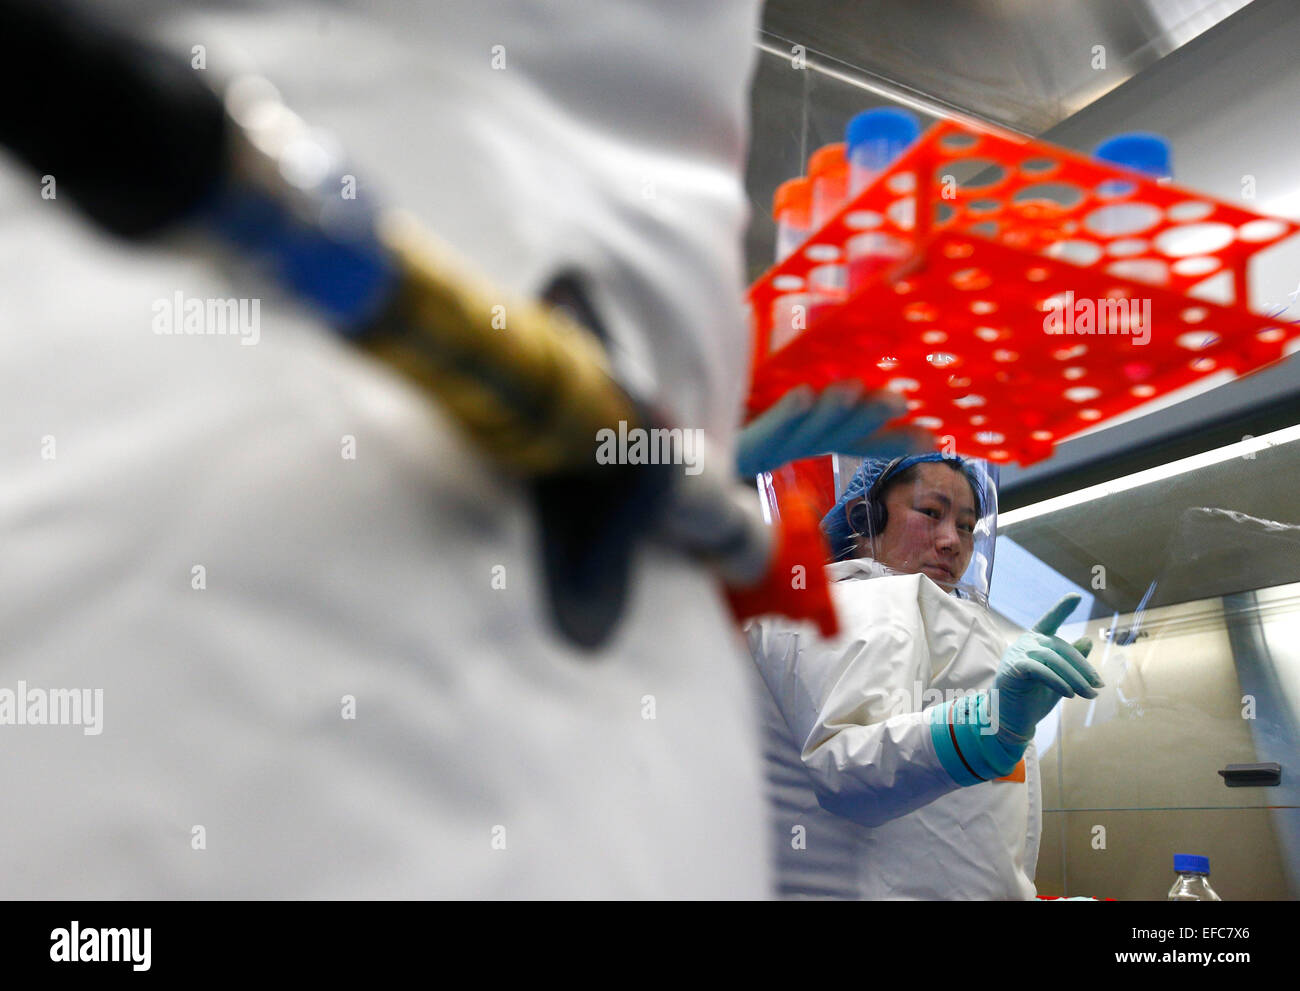 Wuhan, China's Hubei Province. 30th Jan, 2015. A researcher takes part in a drill at the newly-completed lab in Wuhan, capital of central China's Hubei Province, Jan. 30, 2015. China completed its first high level biosafety laboratory based in Wuhan Saturday in Wuhan after more than a decade of construction. The lab will be used to study class four pathogens (P4), which refers to the most virulent viruses that pose a high risk of aerosol-transmitted person-to-person infections. © Yin Gang/Xinhua/Alamy Live News Stock Photo